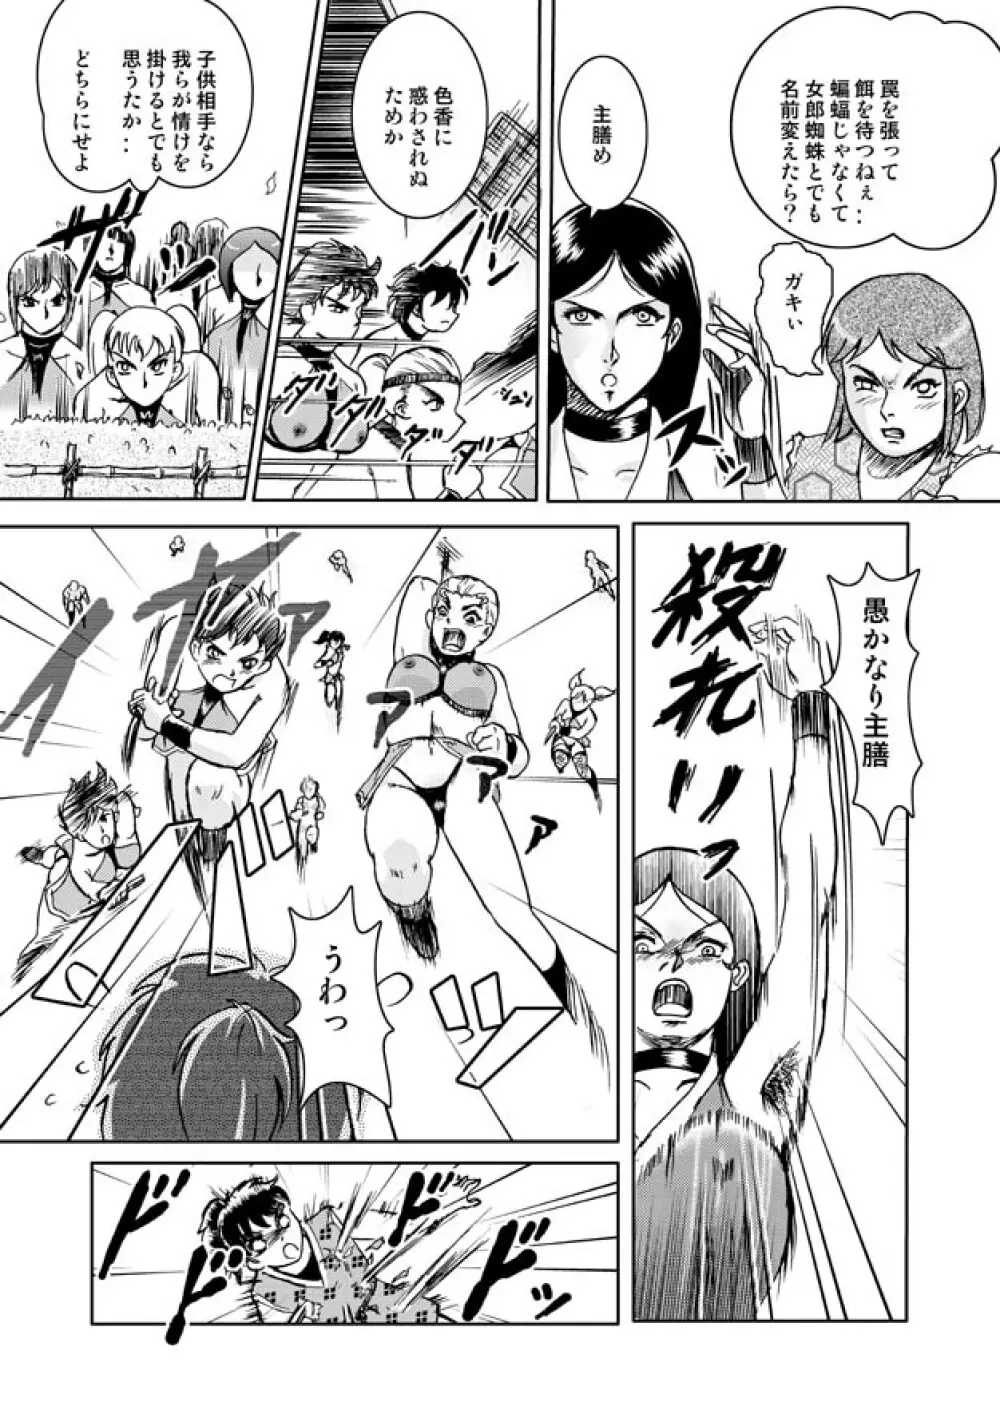 Same-themed manga about kid fighting female ninjas from japanese imageboard. Page.4